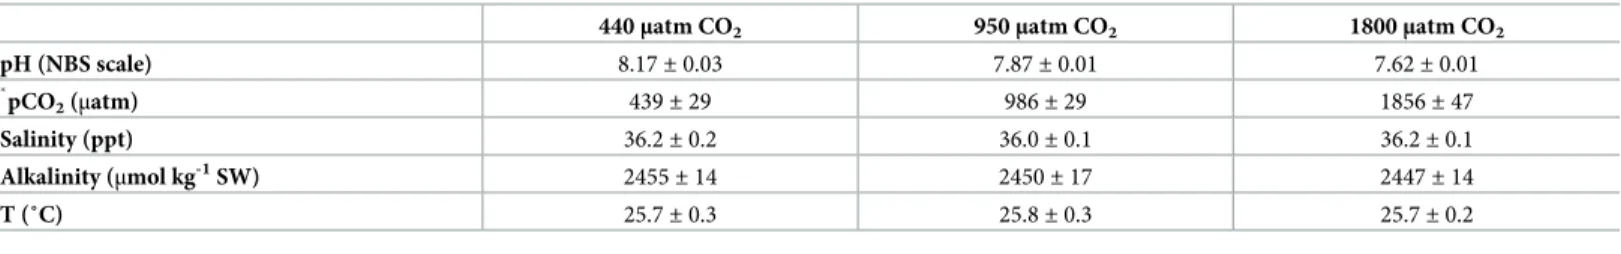 Table 2. Chemical conditions of seawater where sea bream were kept under different CO 2 concentrations over a three month period (daily measurements (90 days) of 8 tanks per treatment).